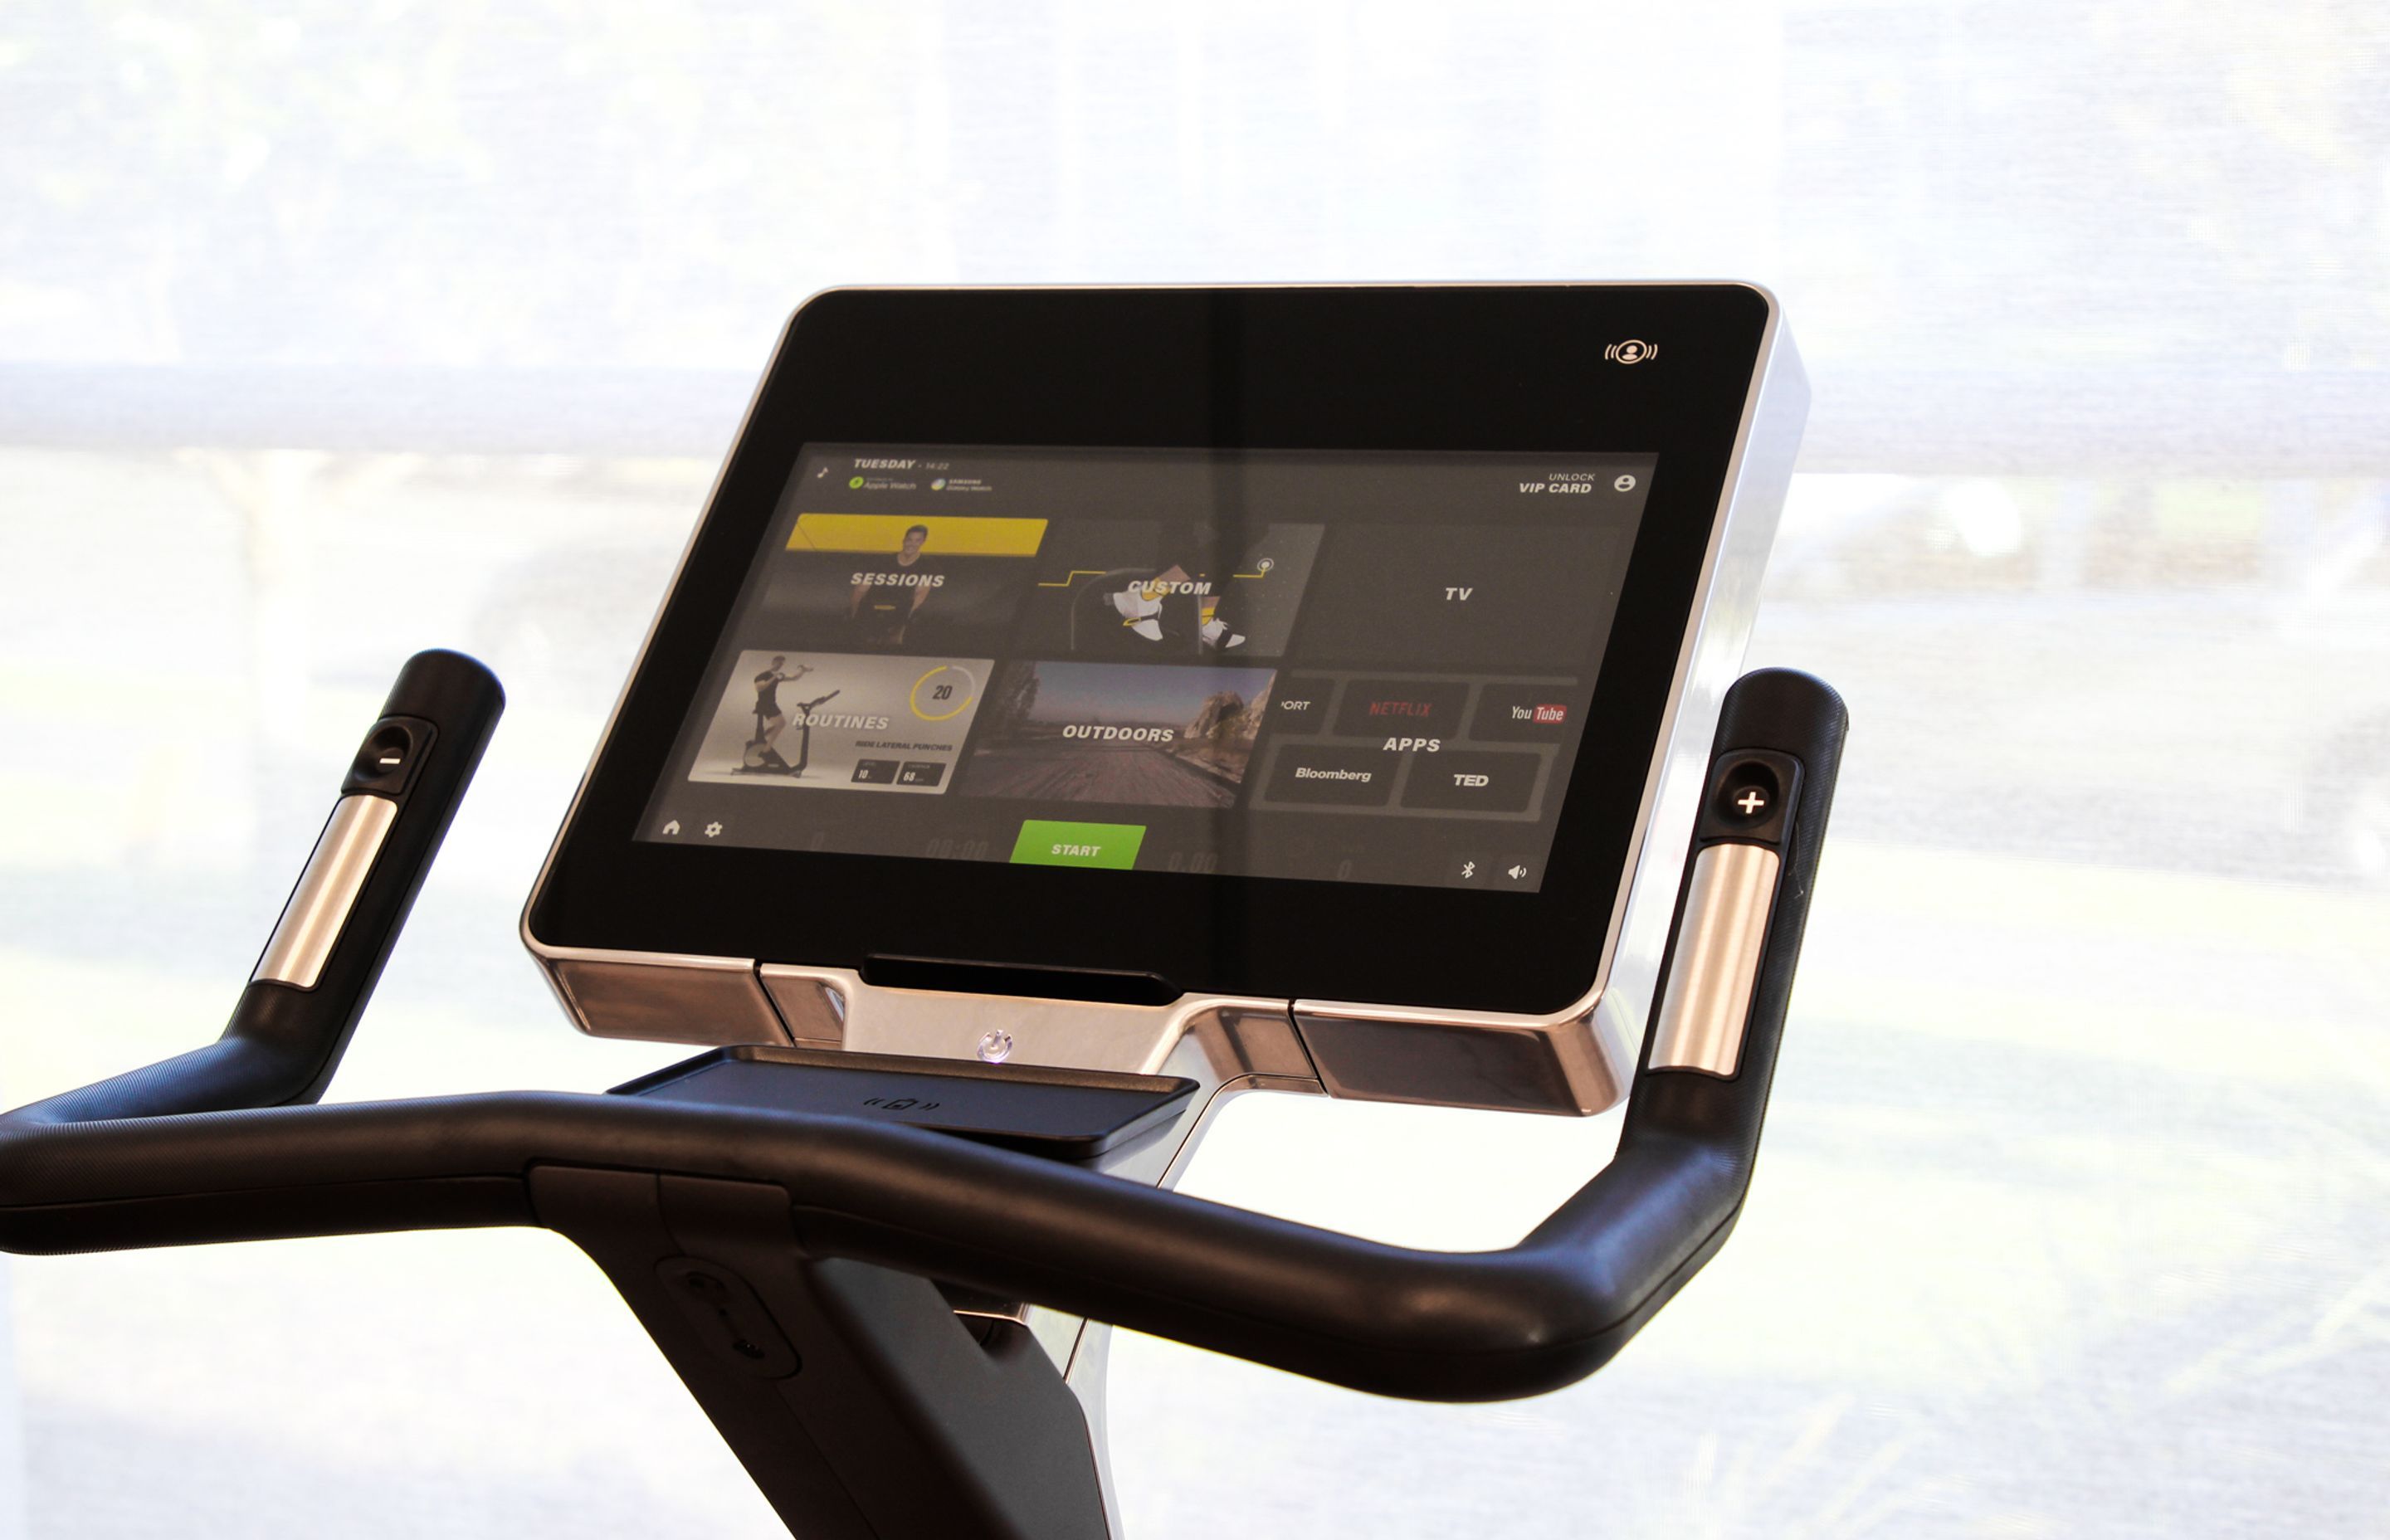 Everyone has that option of being able to go into live classes with Technogym's exercise bikes.